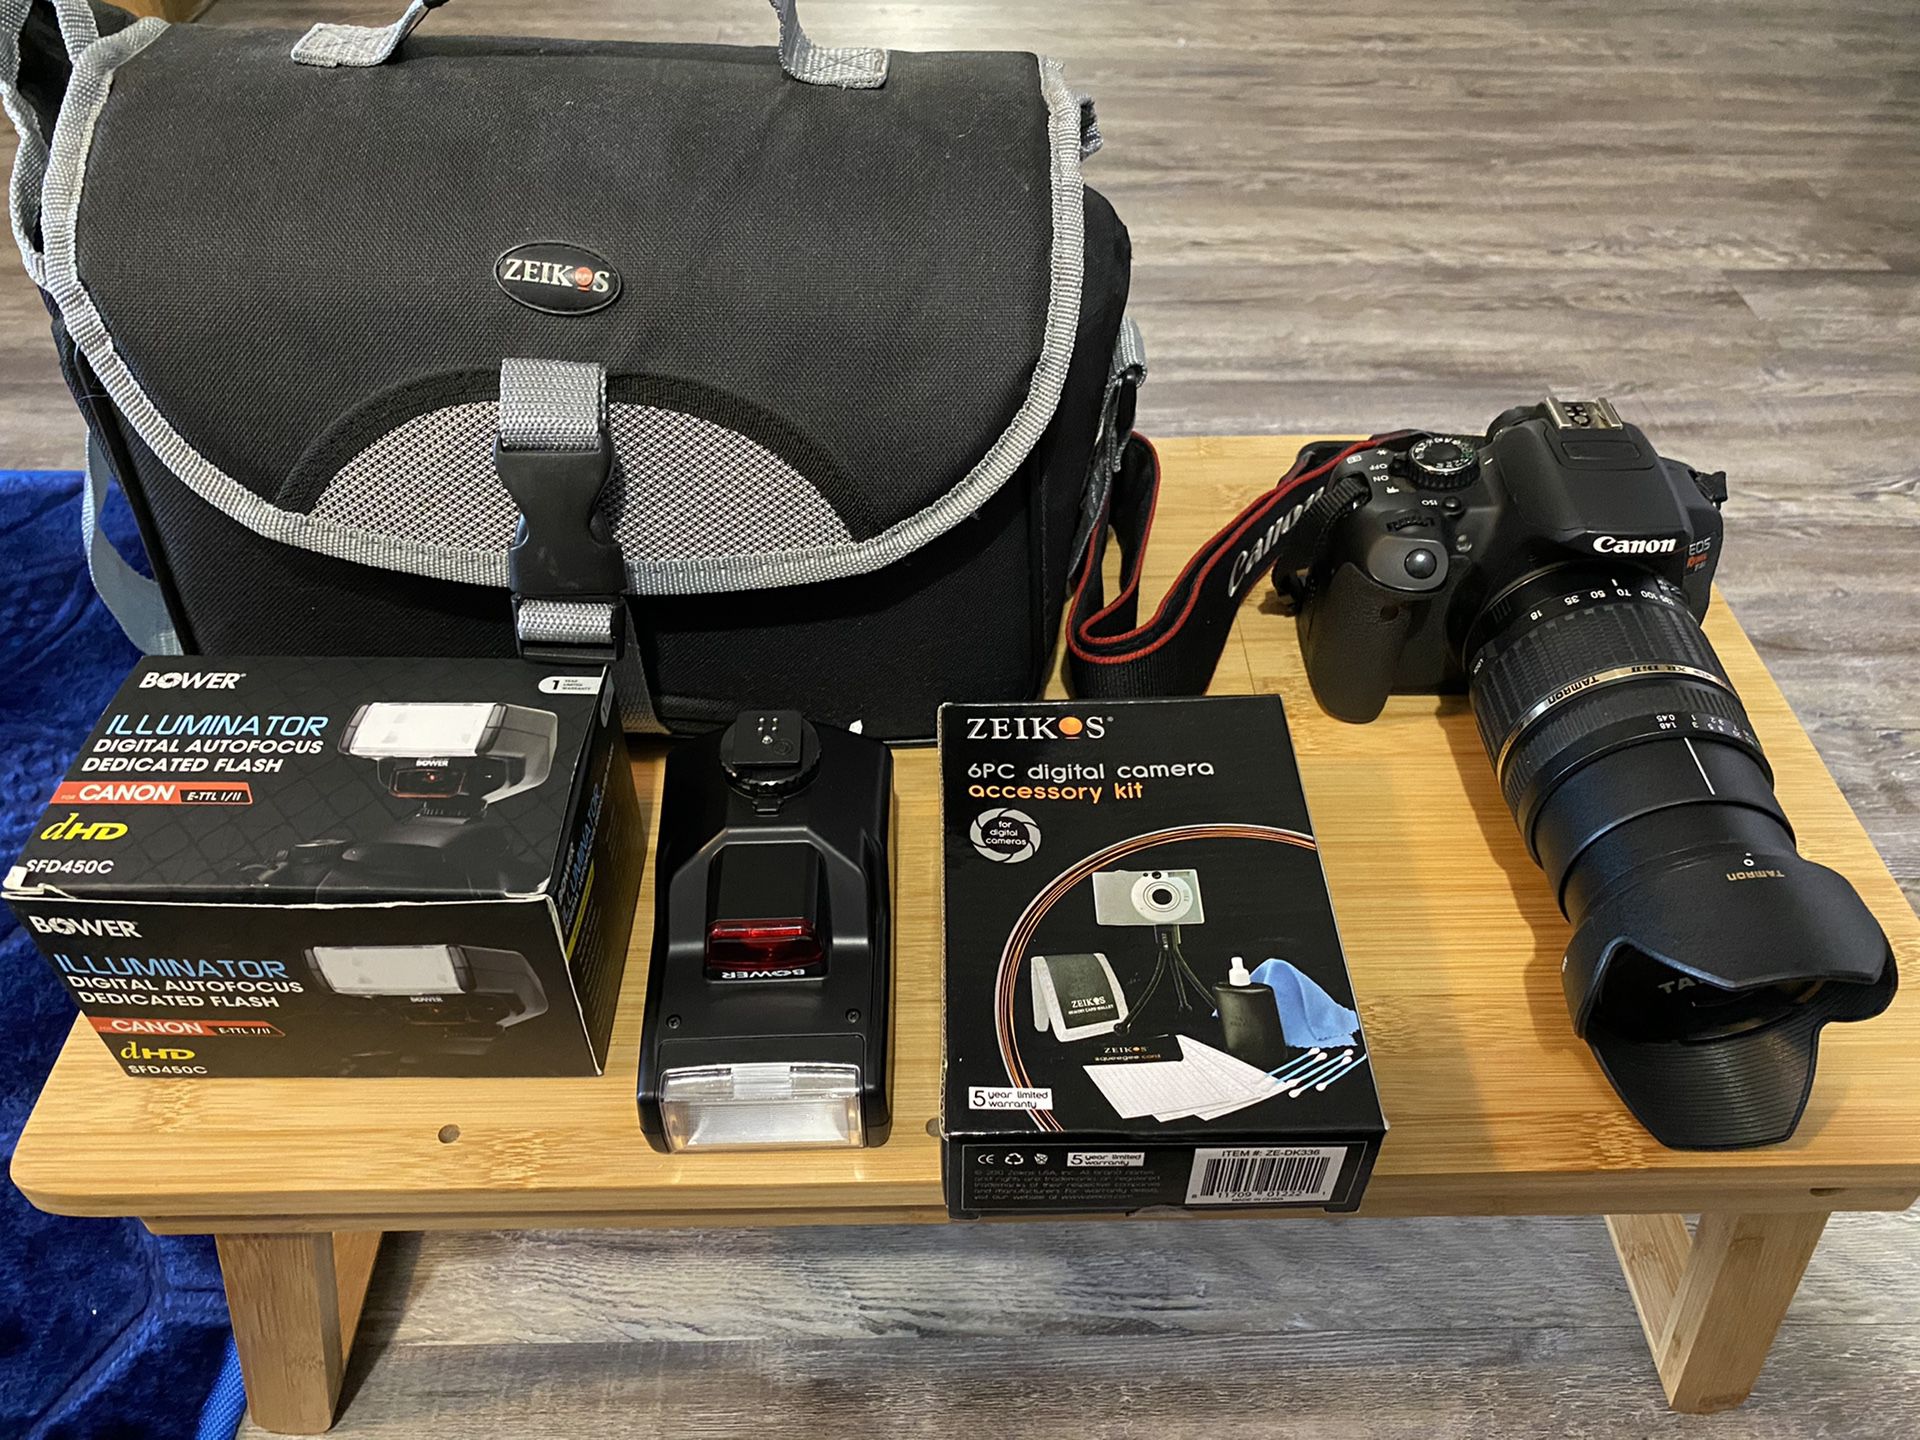 Canon Rebel T4i with lens & accessories